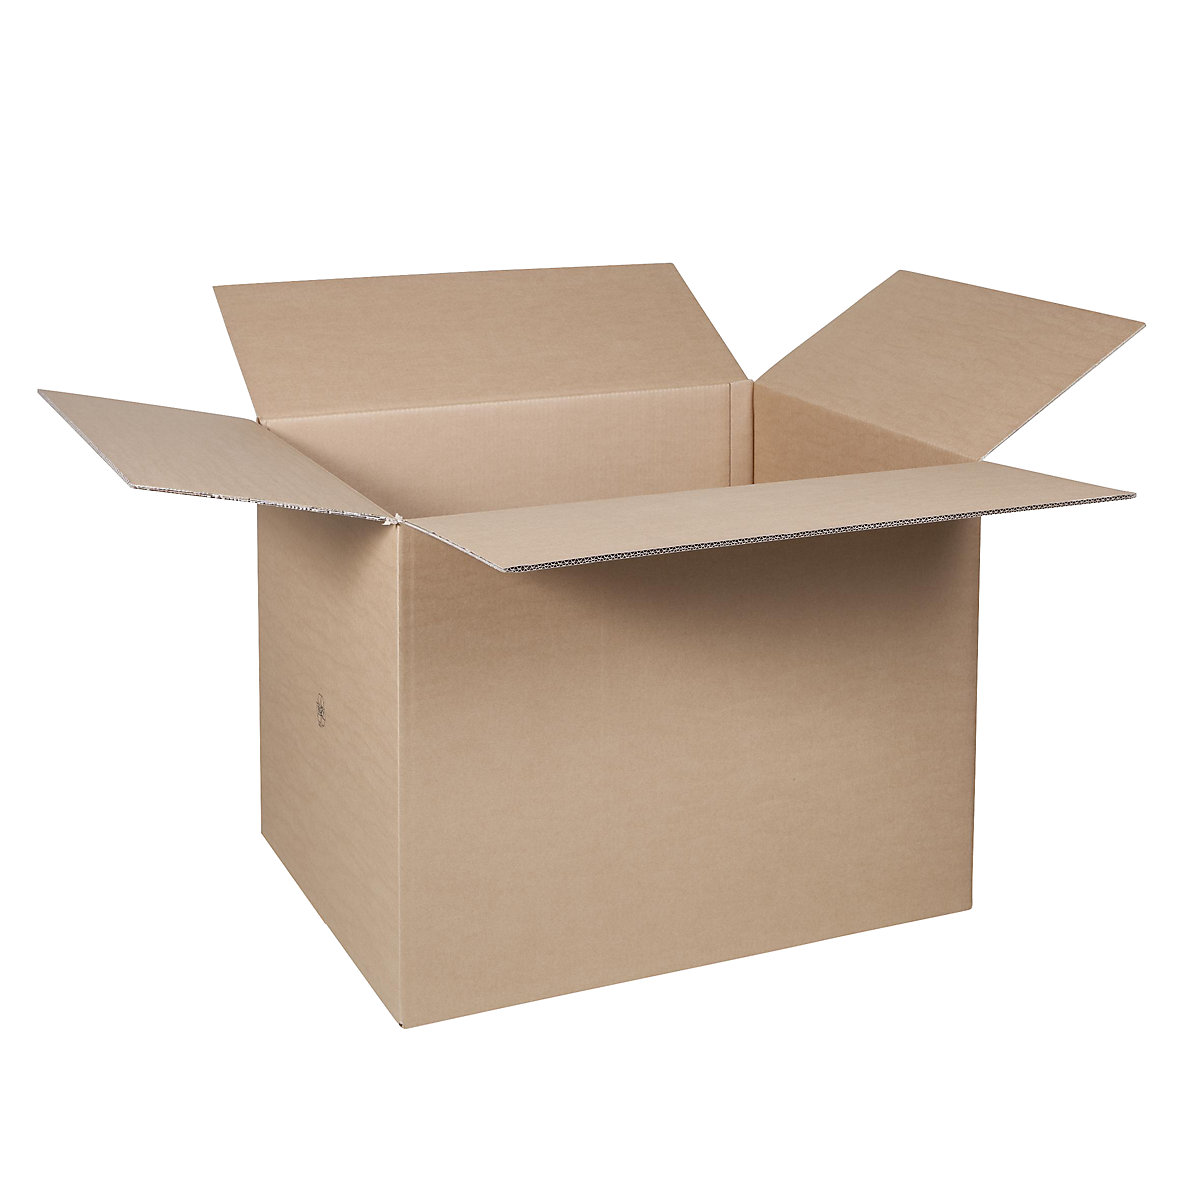 Folding cardboard box, FEFCO 0201, made of double fluted cardboard, internal dimensions 325 x 220 x 160 mm, pack of 50-16